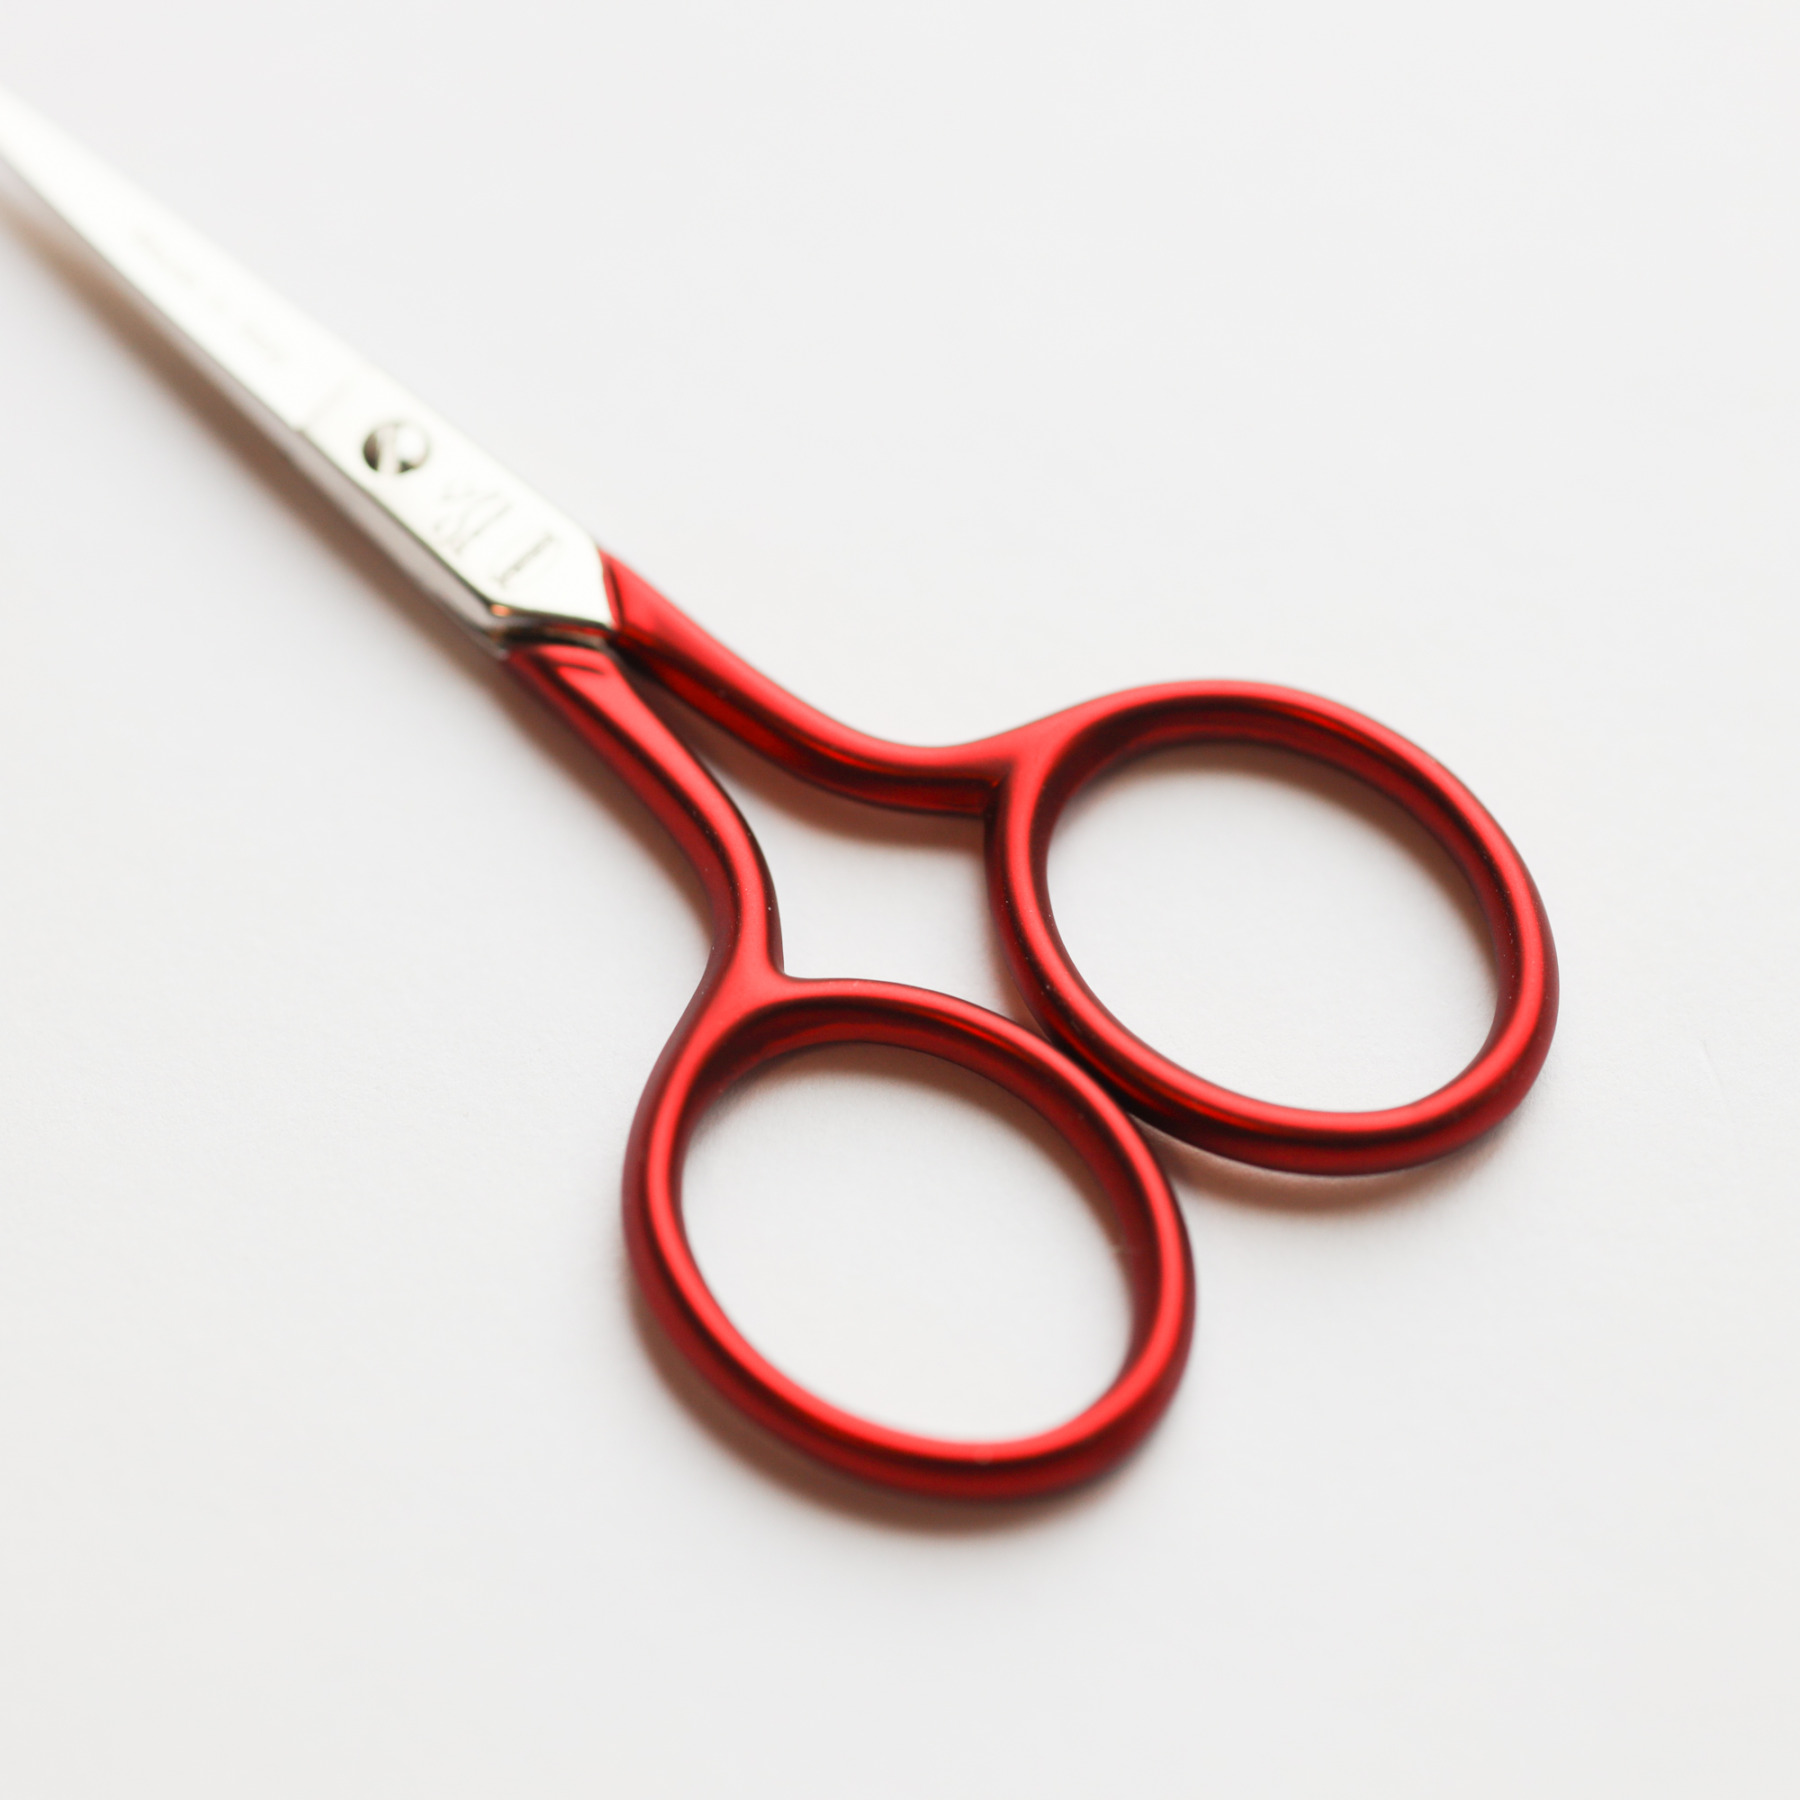 Embroidery Scissors - Soft Touch (9cm)